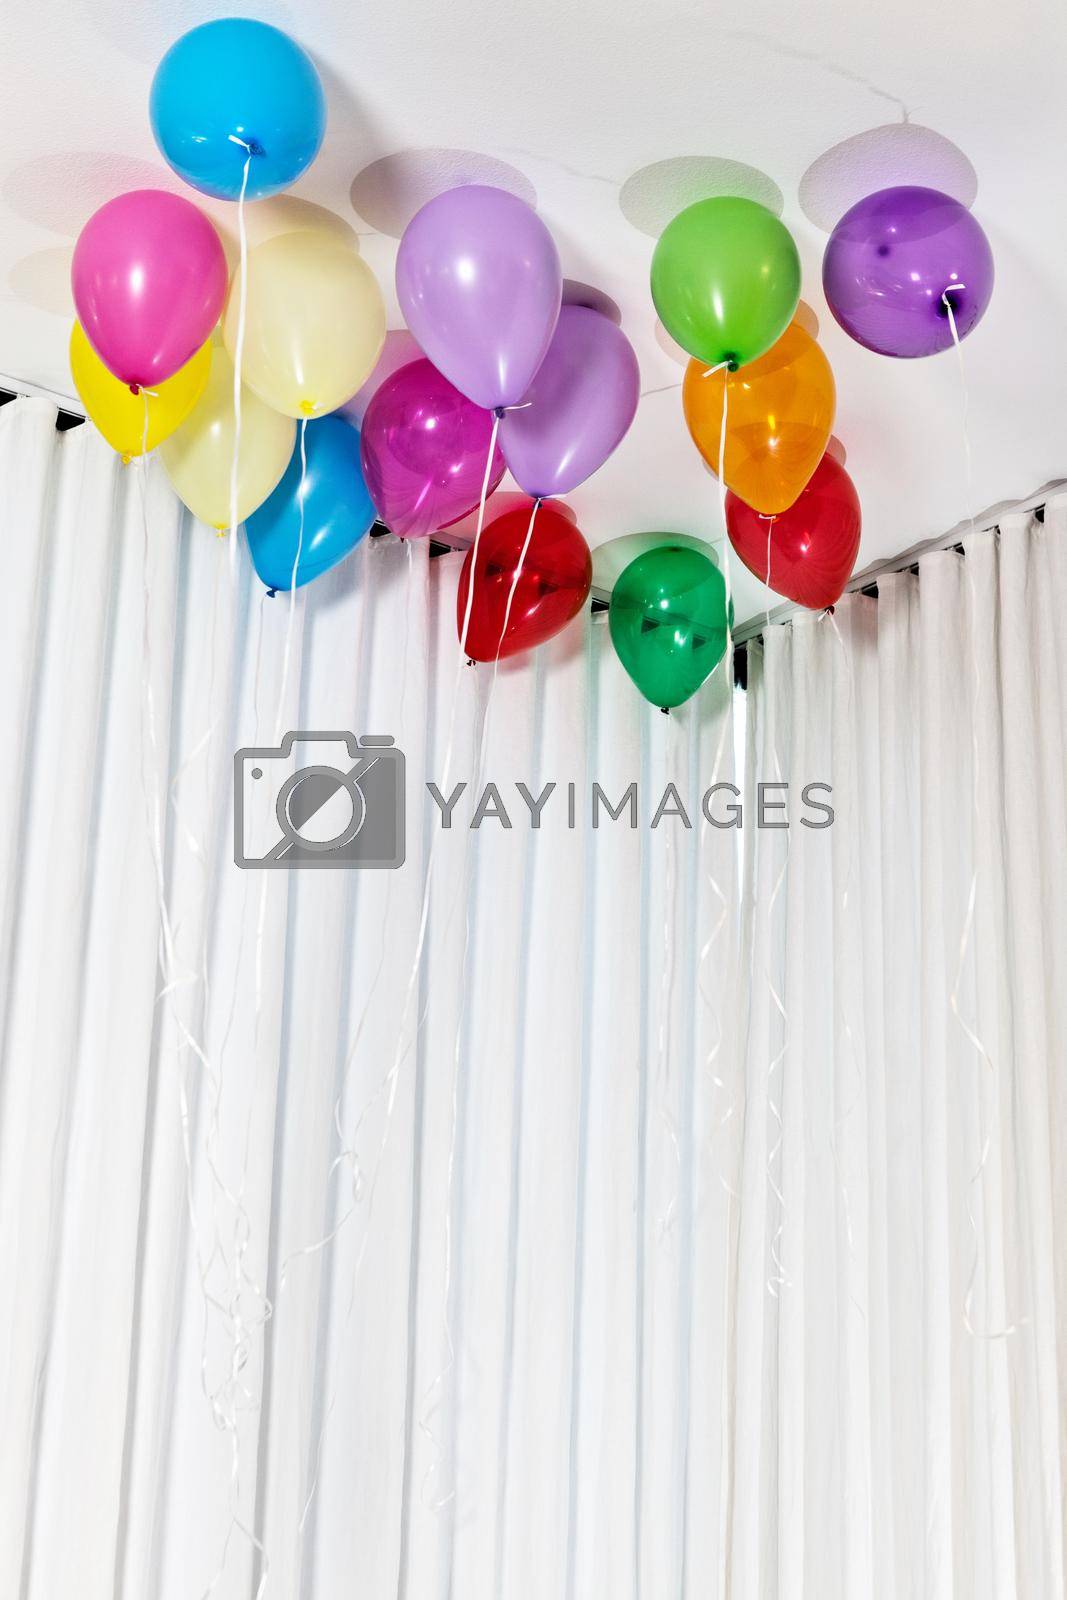 Royalty free image of Multi Coloured Helium Balloons on ceiling by moodboard